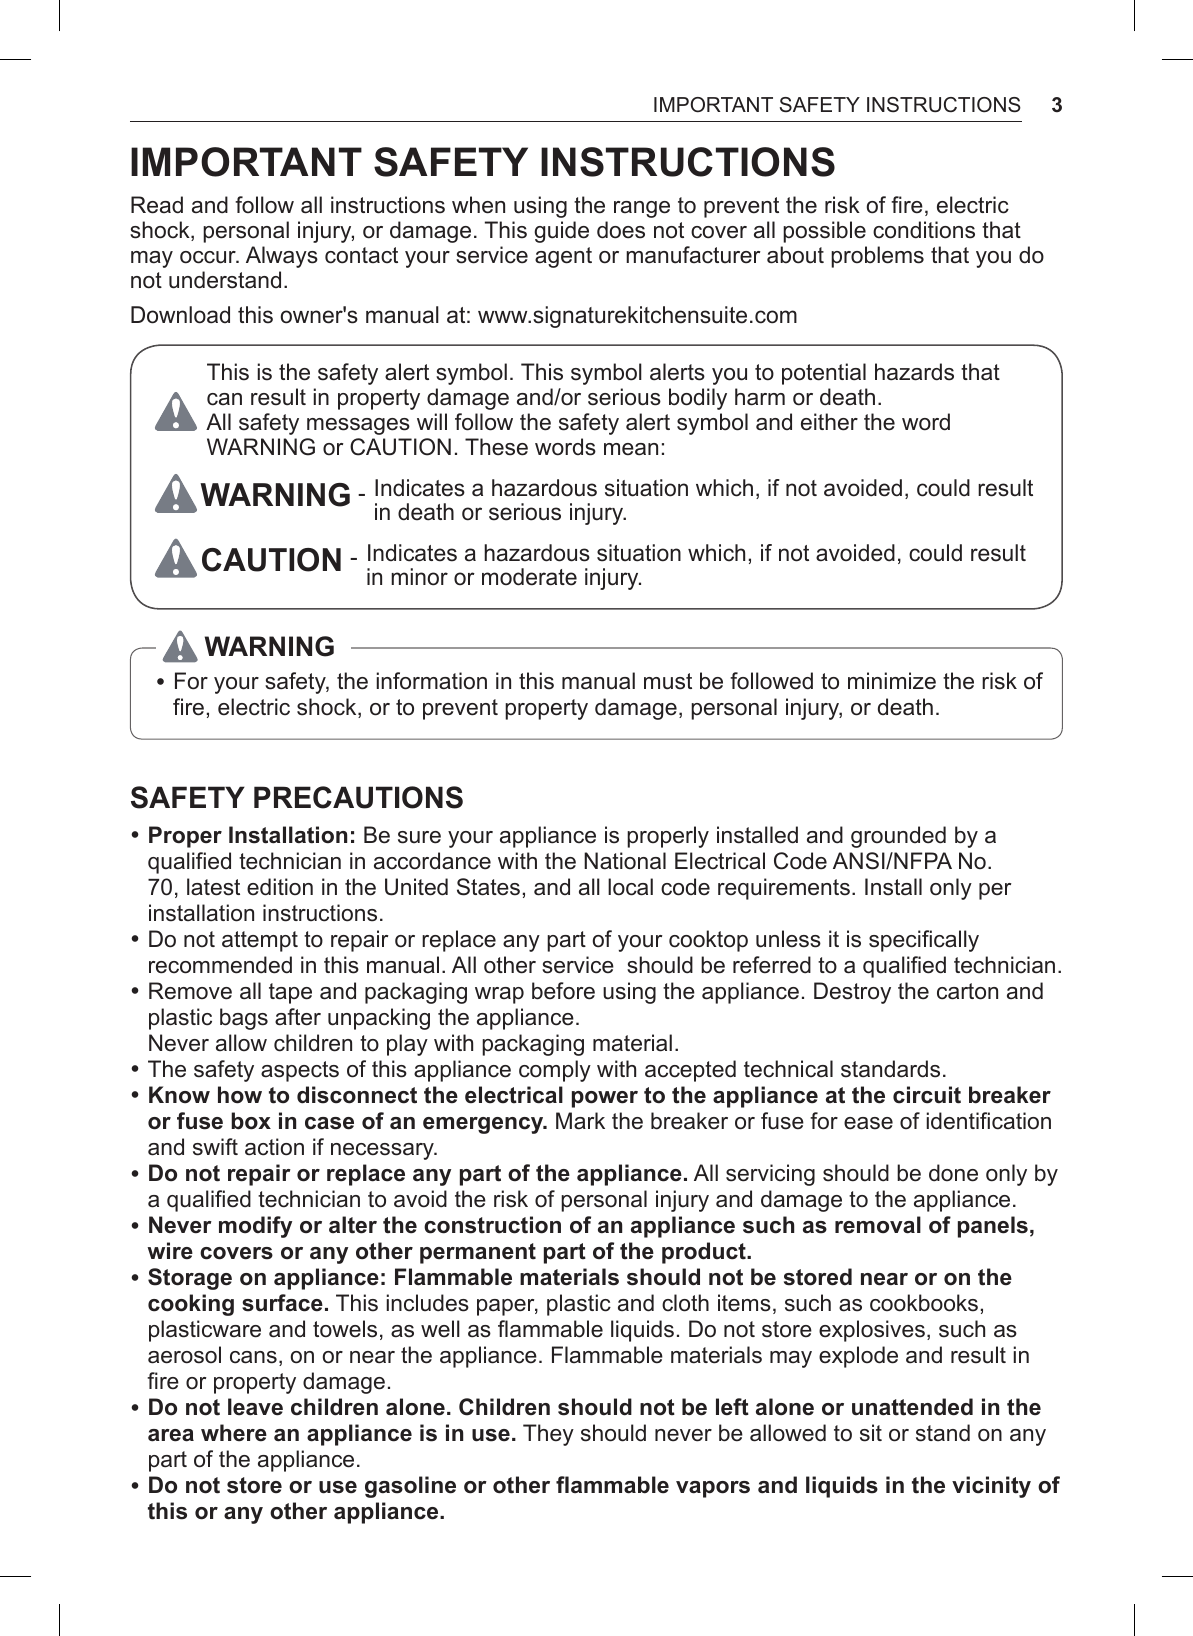 3IMPORTANT SAFETY INSTRUCTIONSIMPORTANT SAFETY INSTRUCTIONSRead and follow all instructions when using the range to prevent the risk of fire, electric shock, personal injury, or damage. This guide does not cover all possible conditions that may occur. Always contact your service agent or manufacturer about problems that you do not understand.Download this owner&apos;s manual at: www.signaturekitchensuite.comThis is the safety alert symbol. This symbol alerts you to potential hazards that can result in property damage and/or serious bodily harm or death. All safety messages will follow the safety alert symbol and either the word WARNING or CAUTION. These words mean:WARNING -  Indicates a hazardous situation which, if not avoided, could result in death or serious injury.CAUTION -  Indicates a hazardous situation which, if not avoided, could result in minor or moderate injury. •For your safety, the information in this manual must be followed to minimize the risk of fire, electric shock, or to prevent property damage, personal injury, or death.WARNINGSAFETY PRECAUTIONS •Proper Installation: Be sure your appliance is properly installed and grounded by a qualified technician in accordance with the National Electrical Code ANSI/NFPA No. 70, latest edition in the United States, and all local code requirements. Install only per installation instructions. •Do not attempt to repair or replace any part of your cooktop unless it is specifically recommended in this manual. All other service  should be referred to a qualified technician. •Remove all tape and packaging wrap before using the appliance. Destroy the carton and plastic bags after unpacking the appliance.  Never allow children to play with packaging material. •The safety aspects of this appliance comply with accepted technical standards. •Know how to disconnect the electrical power to the appliance at the circuit breaker or fuse box in case of an emergency. Mark the breaker or fuse for ease of identification and swift action if necessary. •Do not repair or replace any part of the appliance. All servicing should be done only by a qualified technician to avoid the risk of personal injury and damage to the appliance. •Never modify or alter the construction of an appliance such as removal of panels, wire covers or any other permanent part of the product. •Storage on appliance: Flammable materials should not be stored near or on the cooking surface. This includes paper, plastic and cloth items, such as cookbooks, plasticware and towels, as well as flammable liquids. Do not store explosives, such as aerosol cans, on or near the appliance. Flammable materials may explode and result in fire or property damage. •Do not leave children alone. Children should not be left alone or unattended in the area where an appliance is in use. They should never be allowed to sit or stand on any part of the appliance. •Do not store or use gasoline or other flammable vapors and liquids in the vicinity of this or any other appliance.